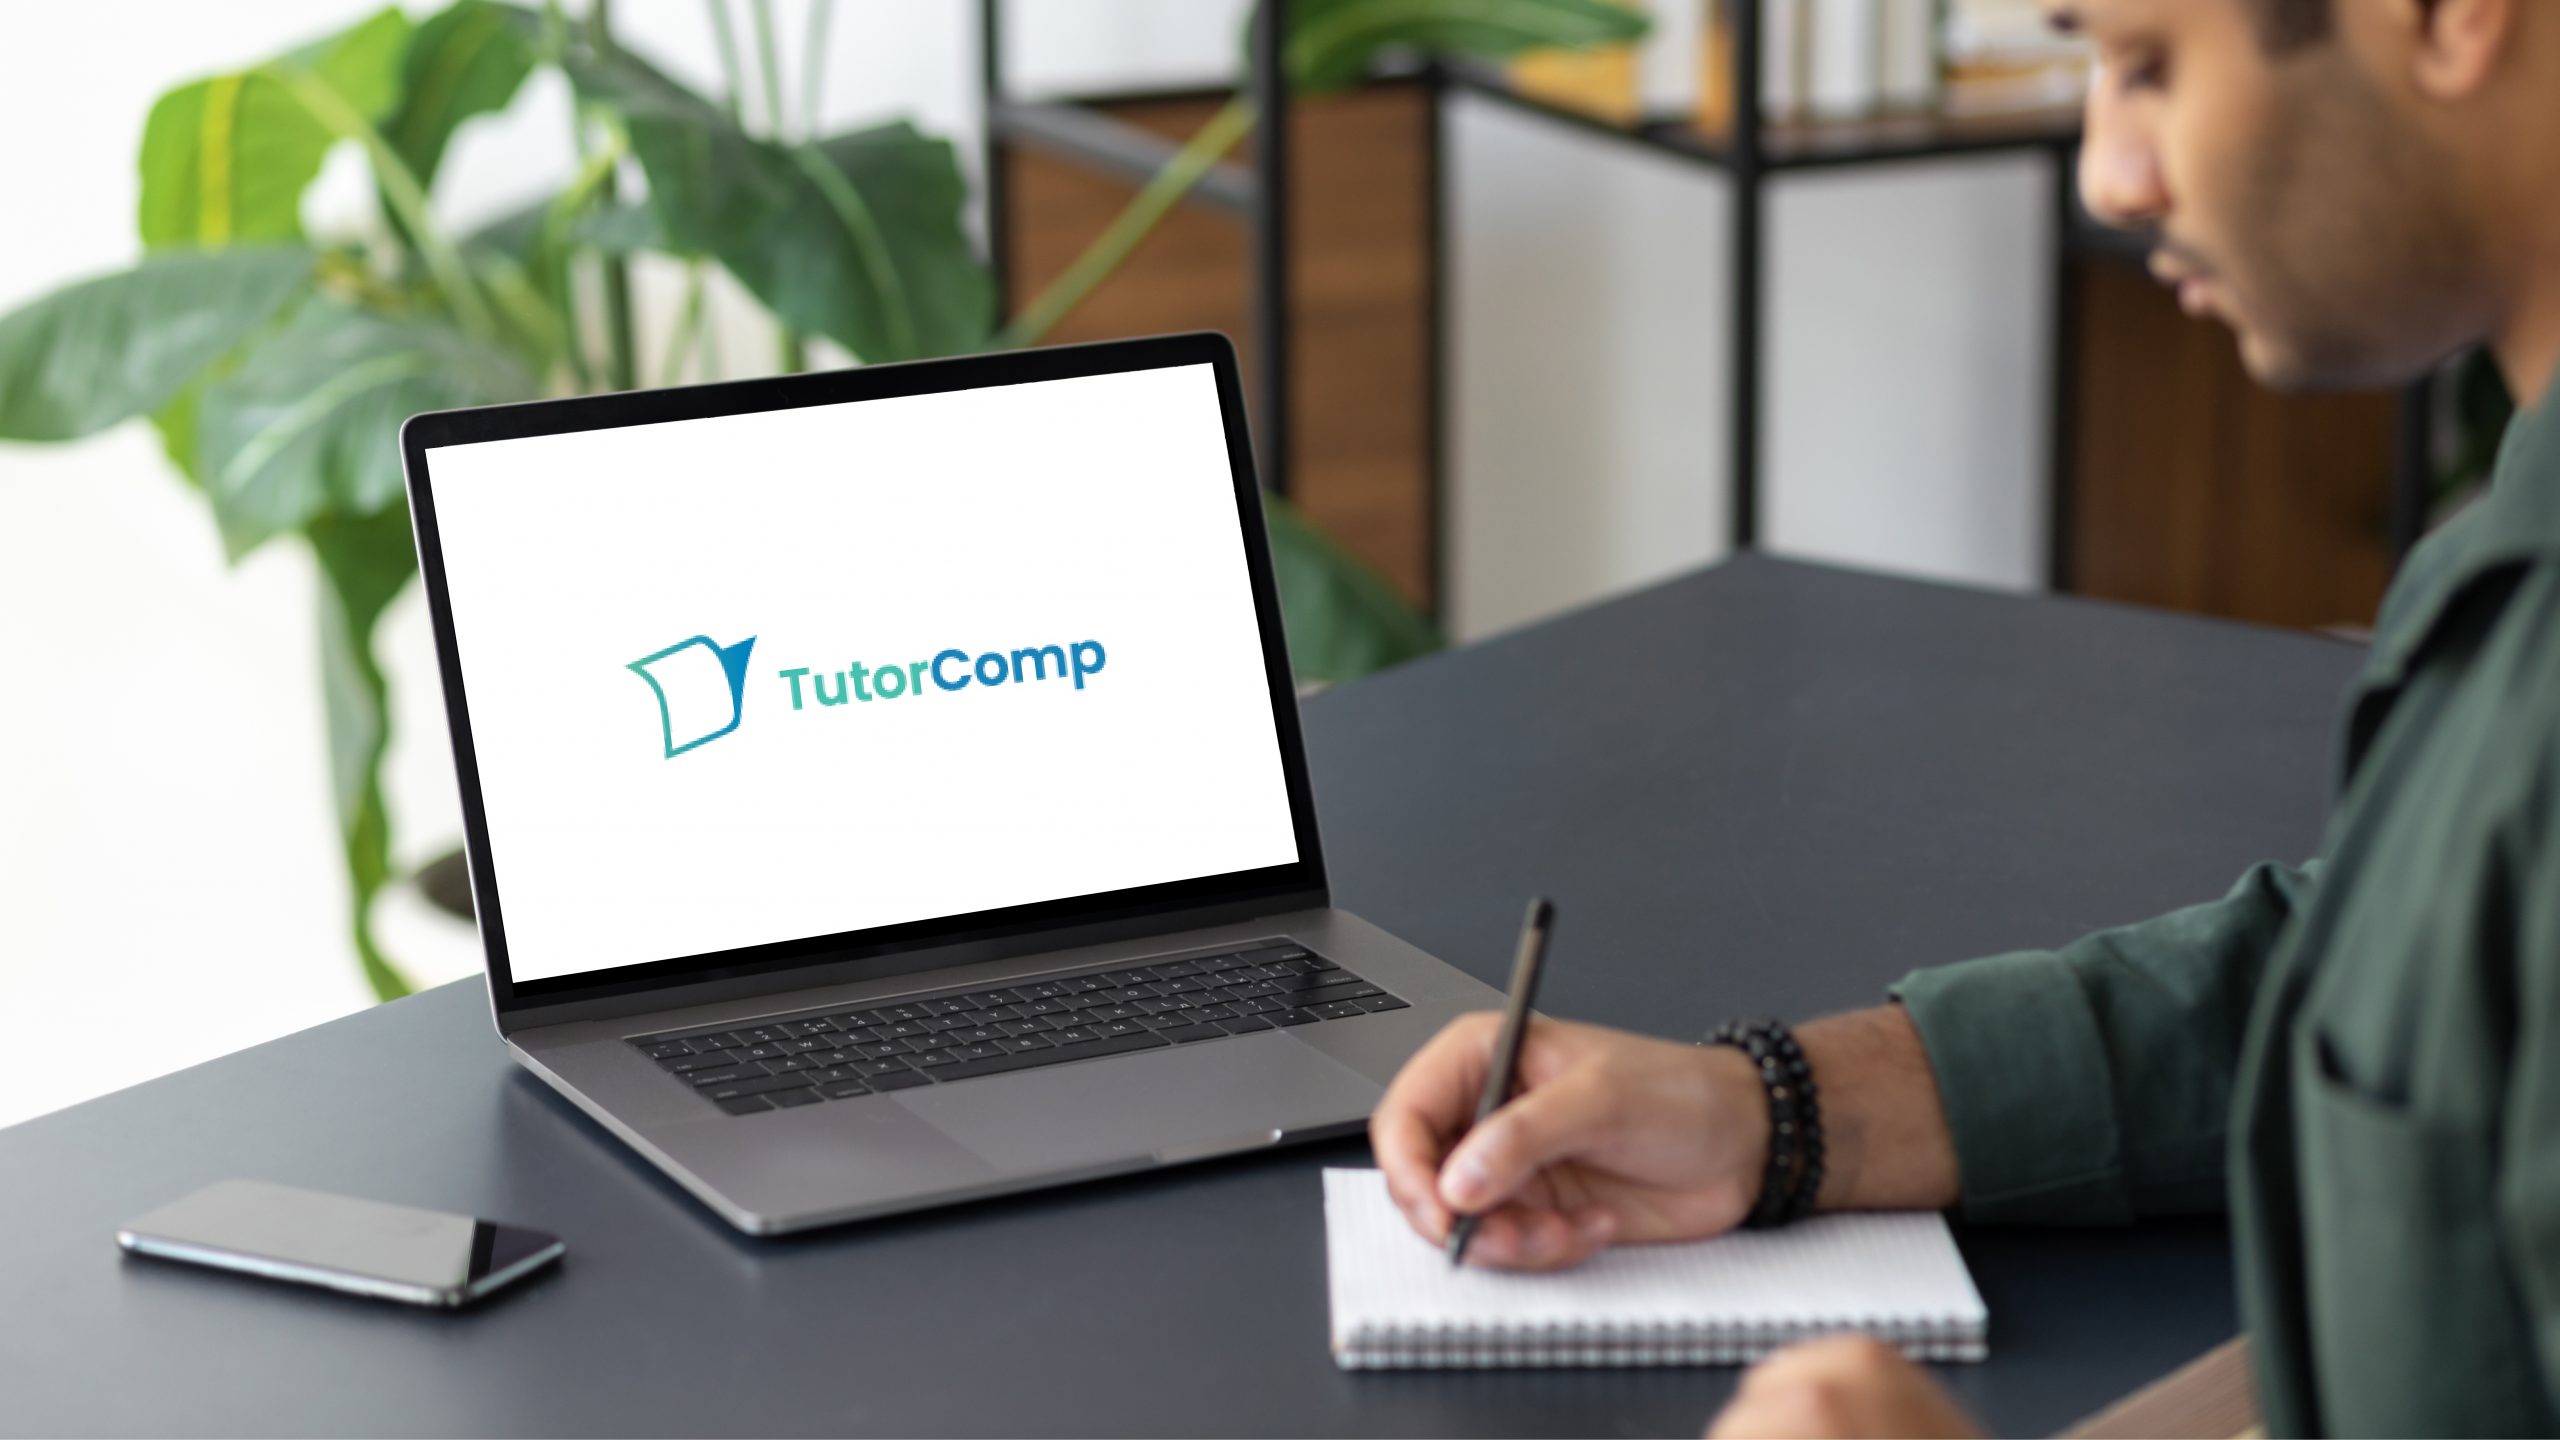 Making Online Education Easier: Revamping Tutorcomp's Website for Lead Generation and User Experience